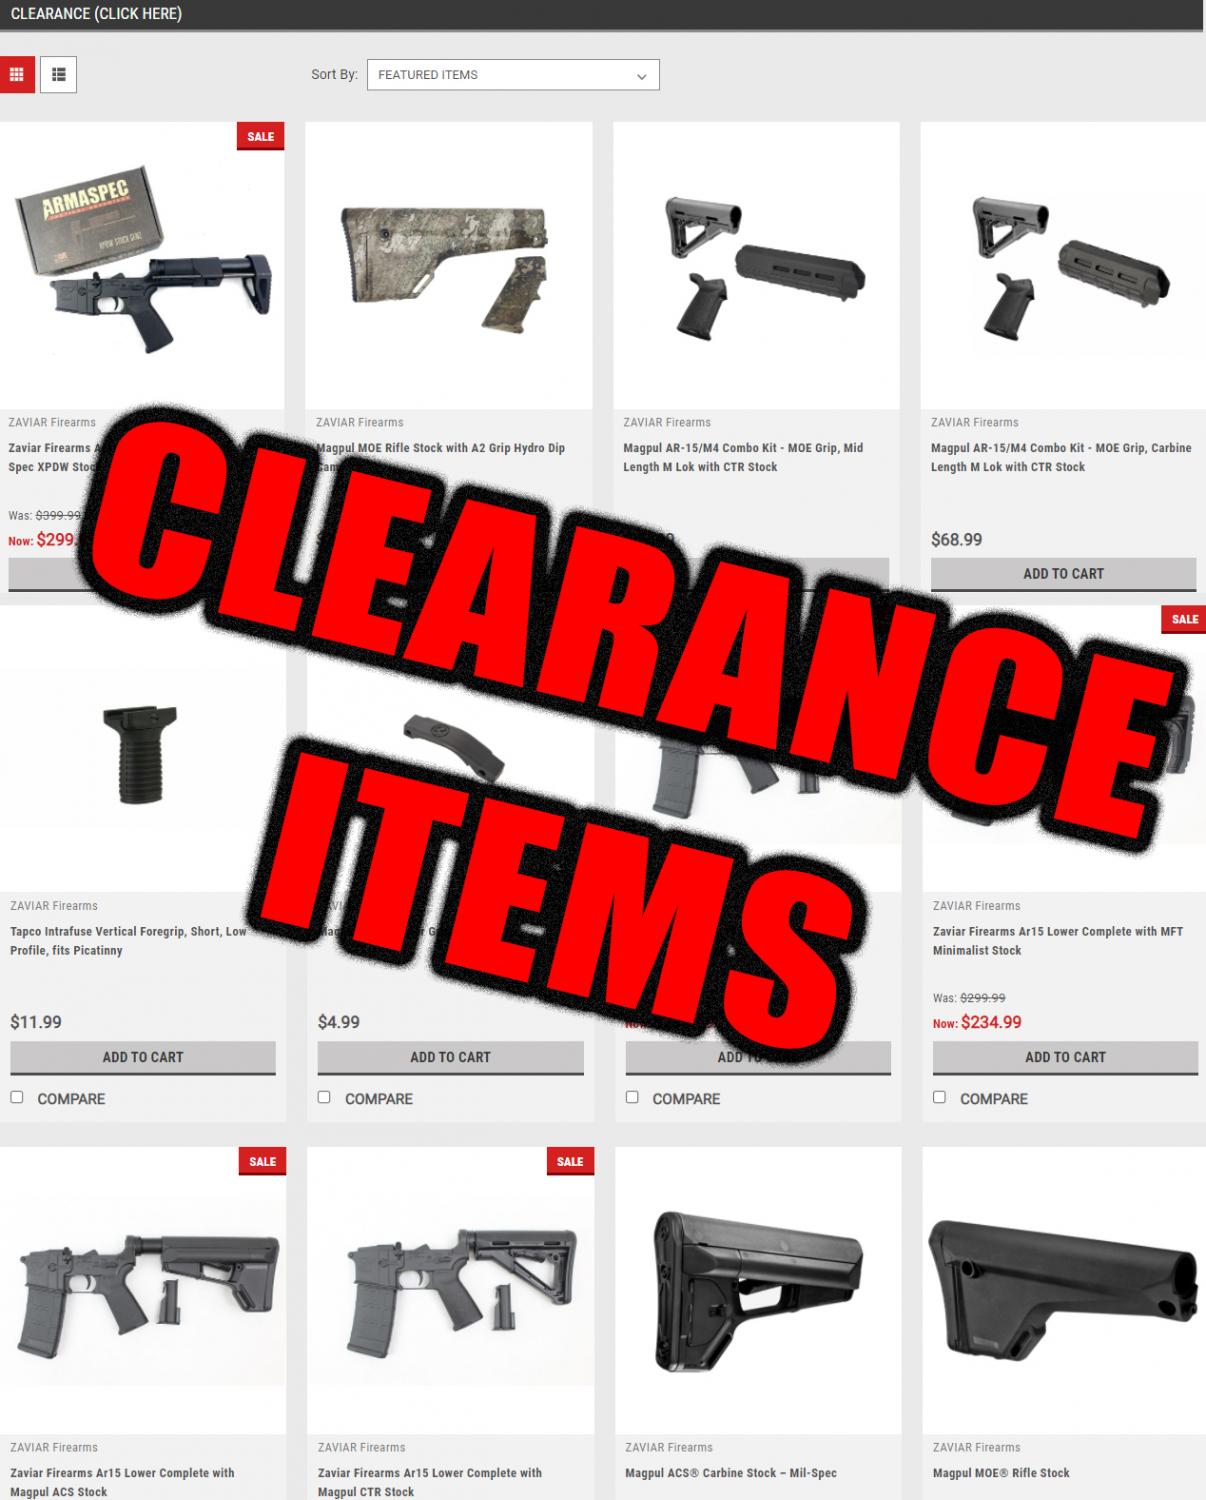 CLEARANCE BLOW OUT SALE - $99.99